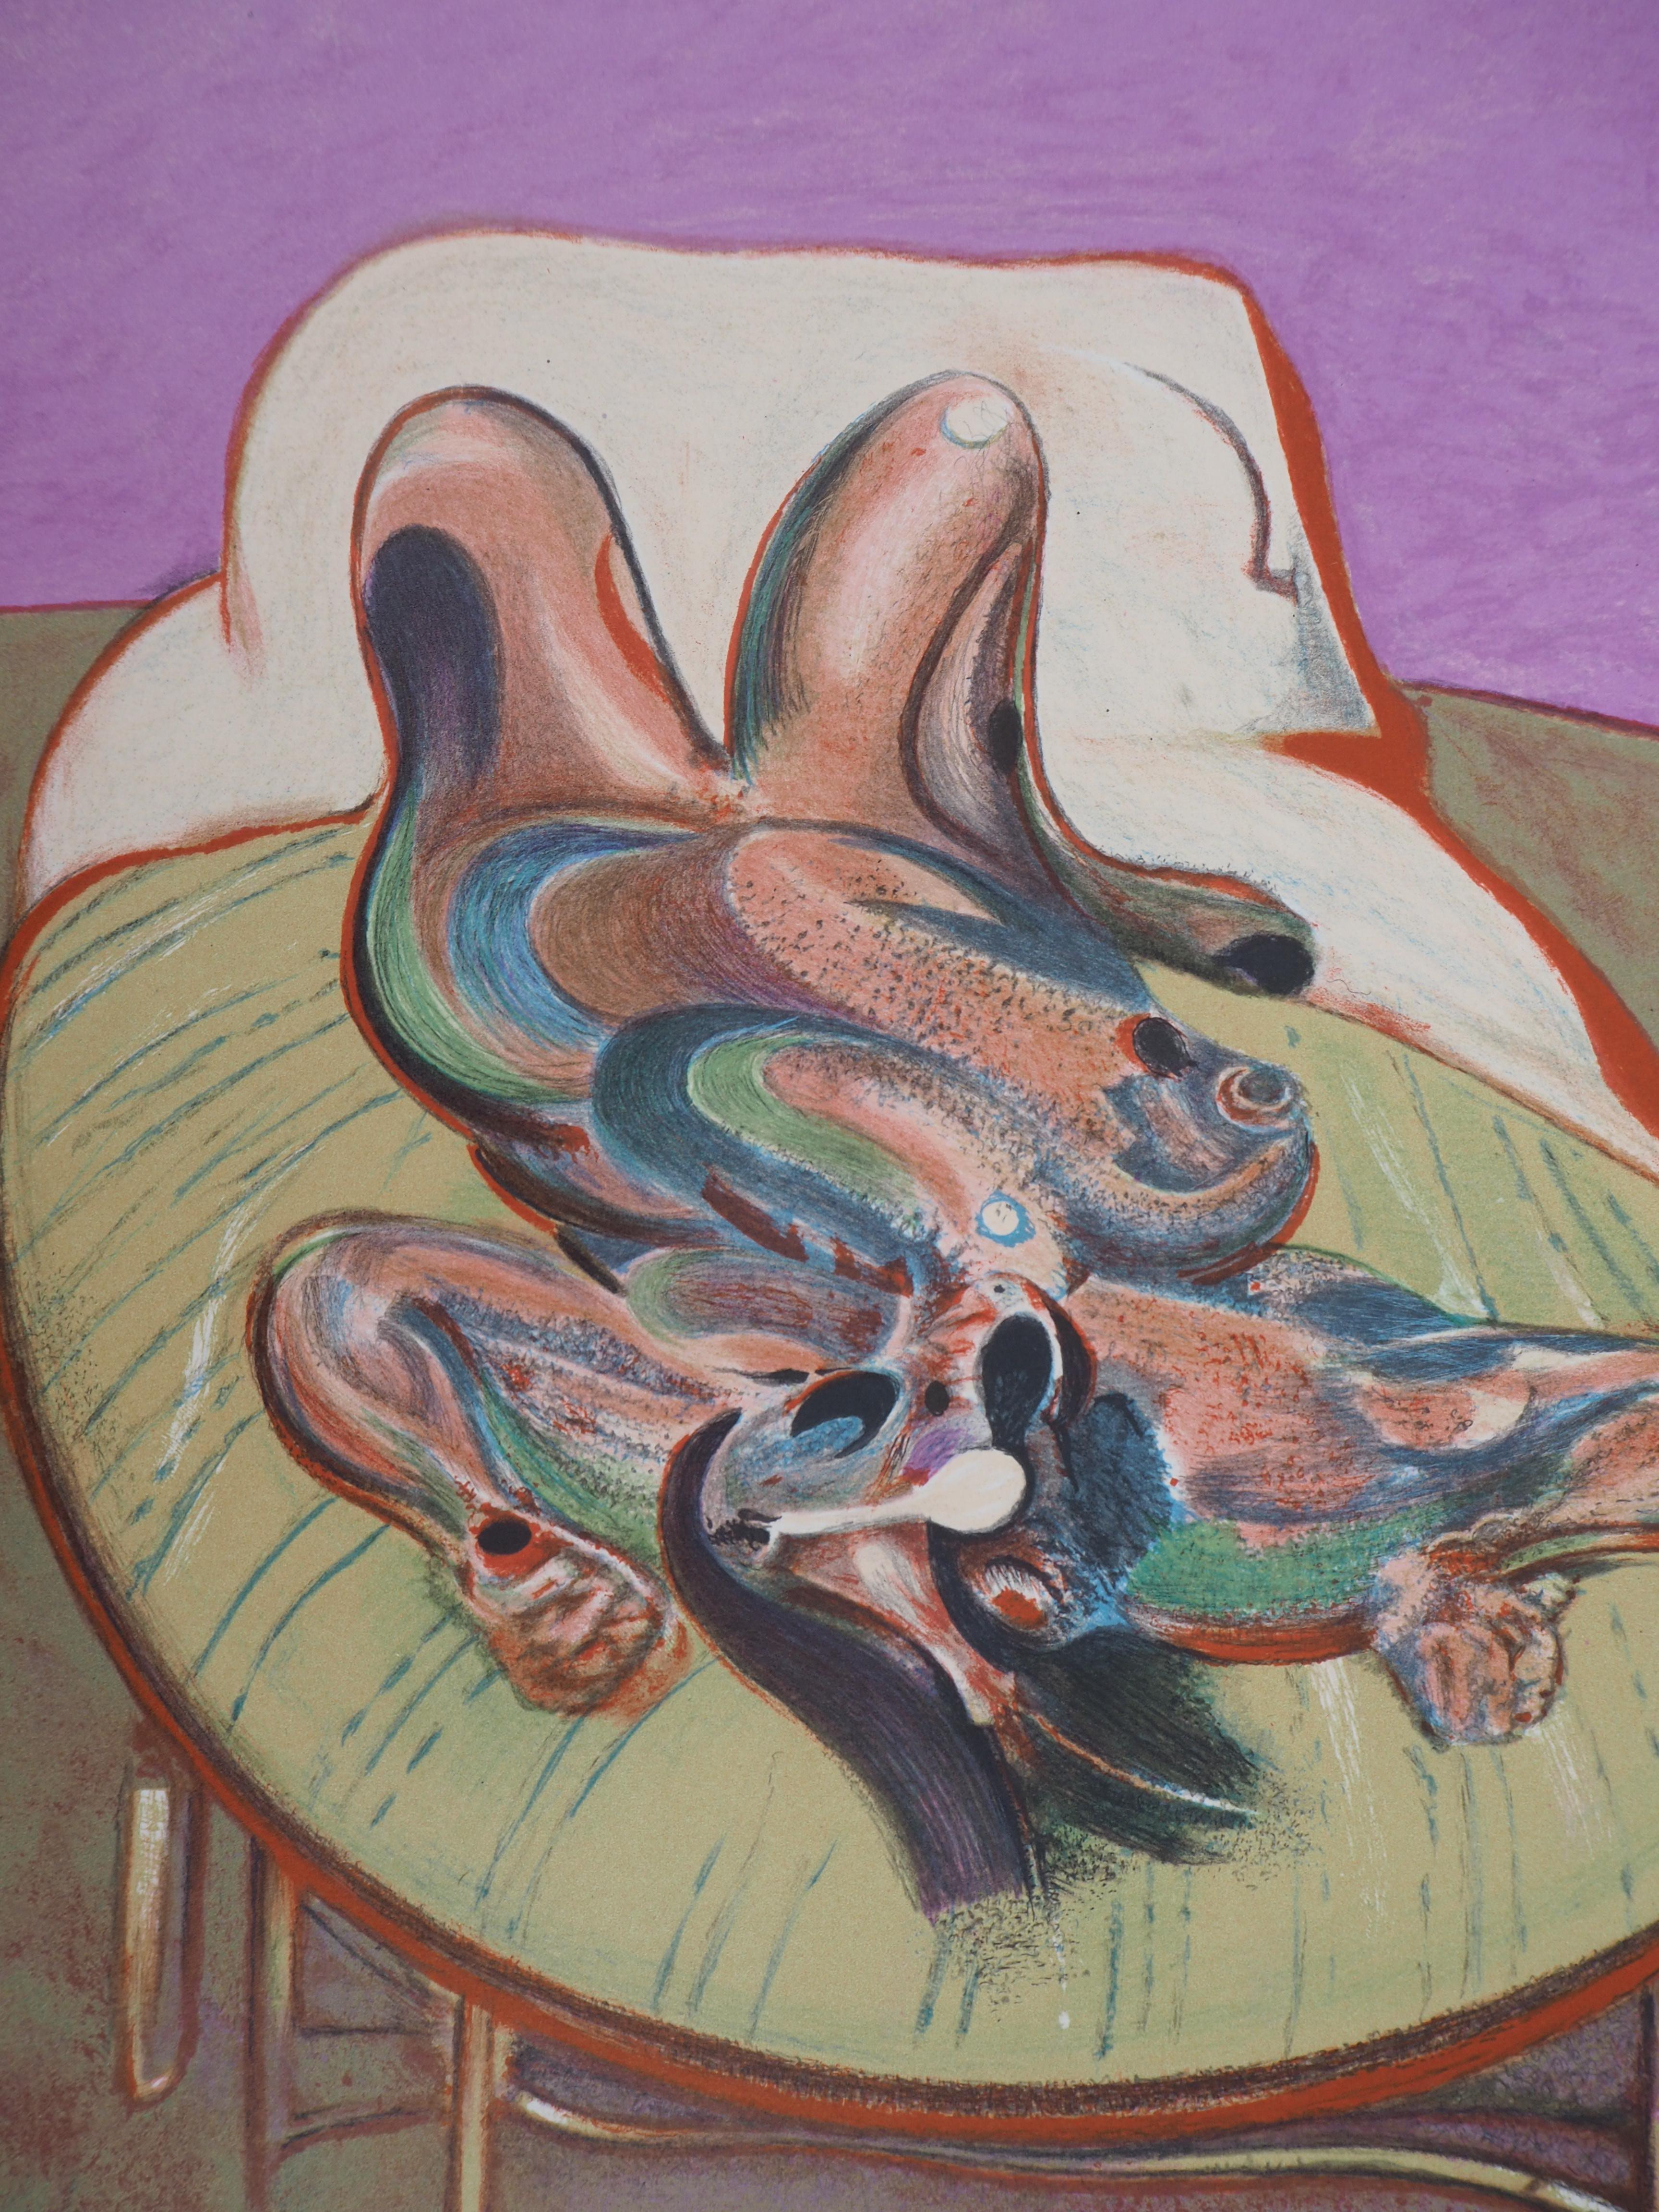 Francis BACON (after)
Lying Woman

Original vintage lithograph poster
On heavy paper 
71 x 45 cm (c. 28 x 18 inch)
This lithograph was created for the artist exhibition at Maeght Gallery in 1966

Excellent condition